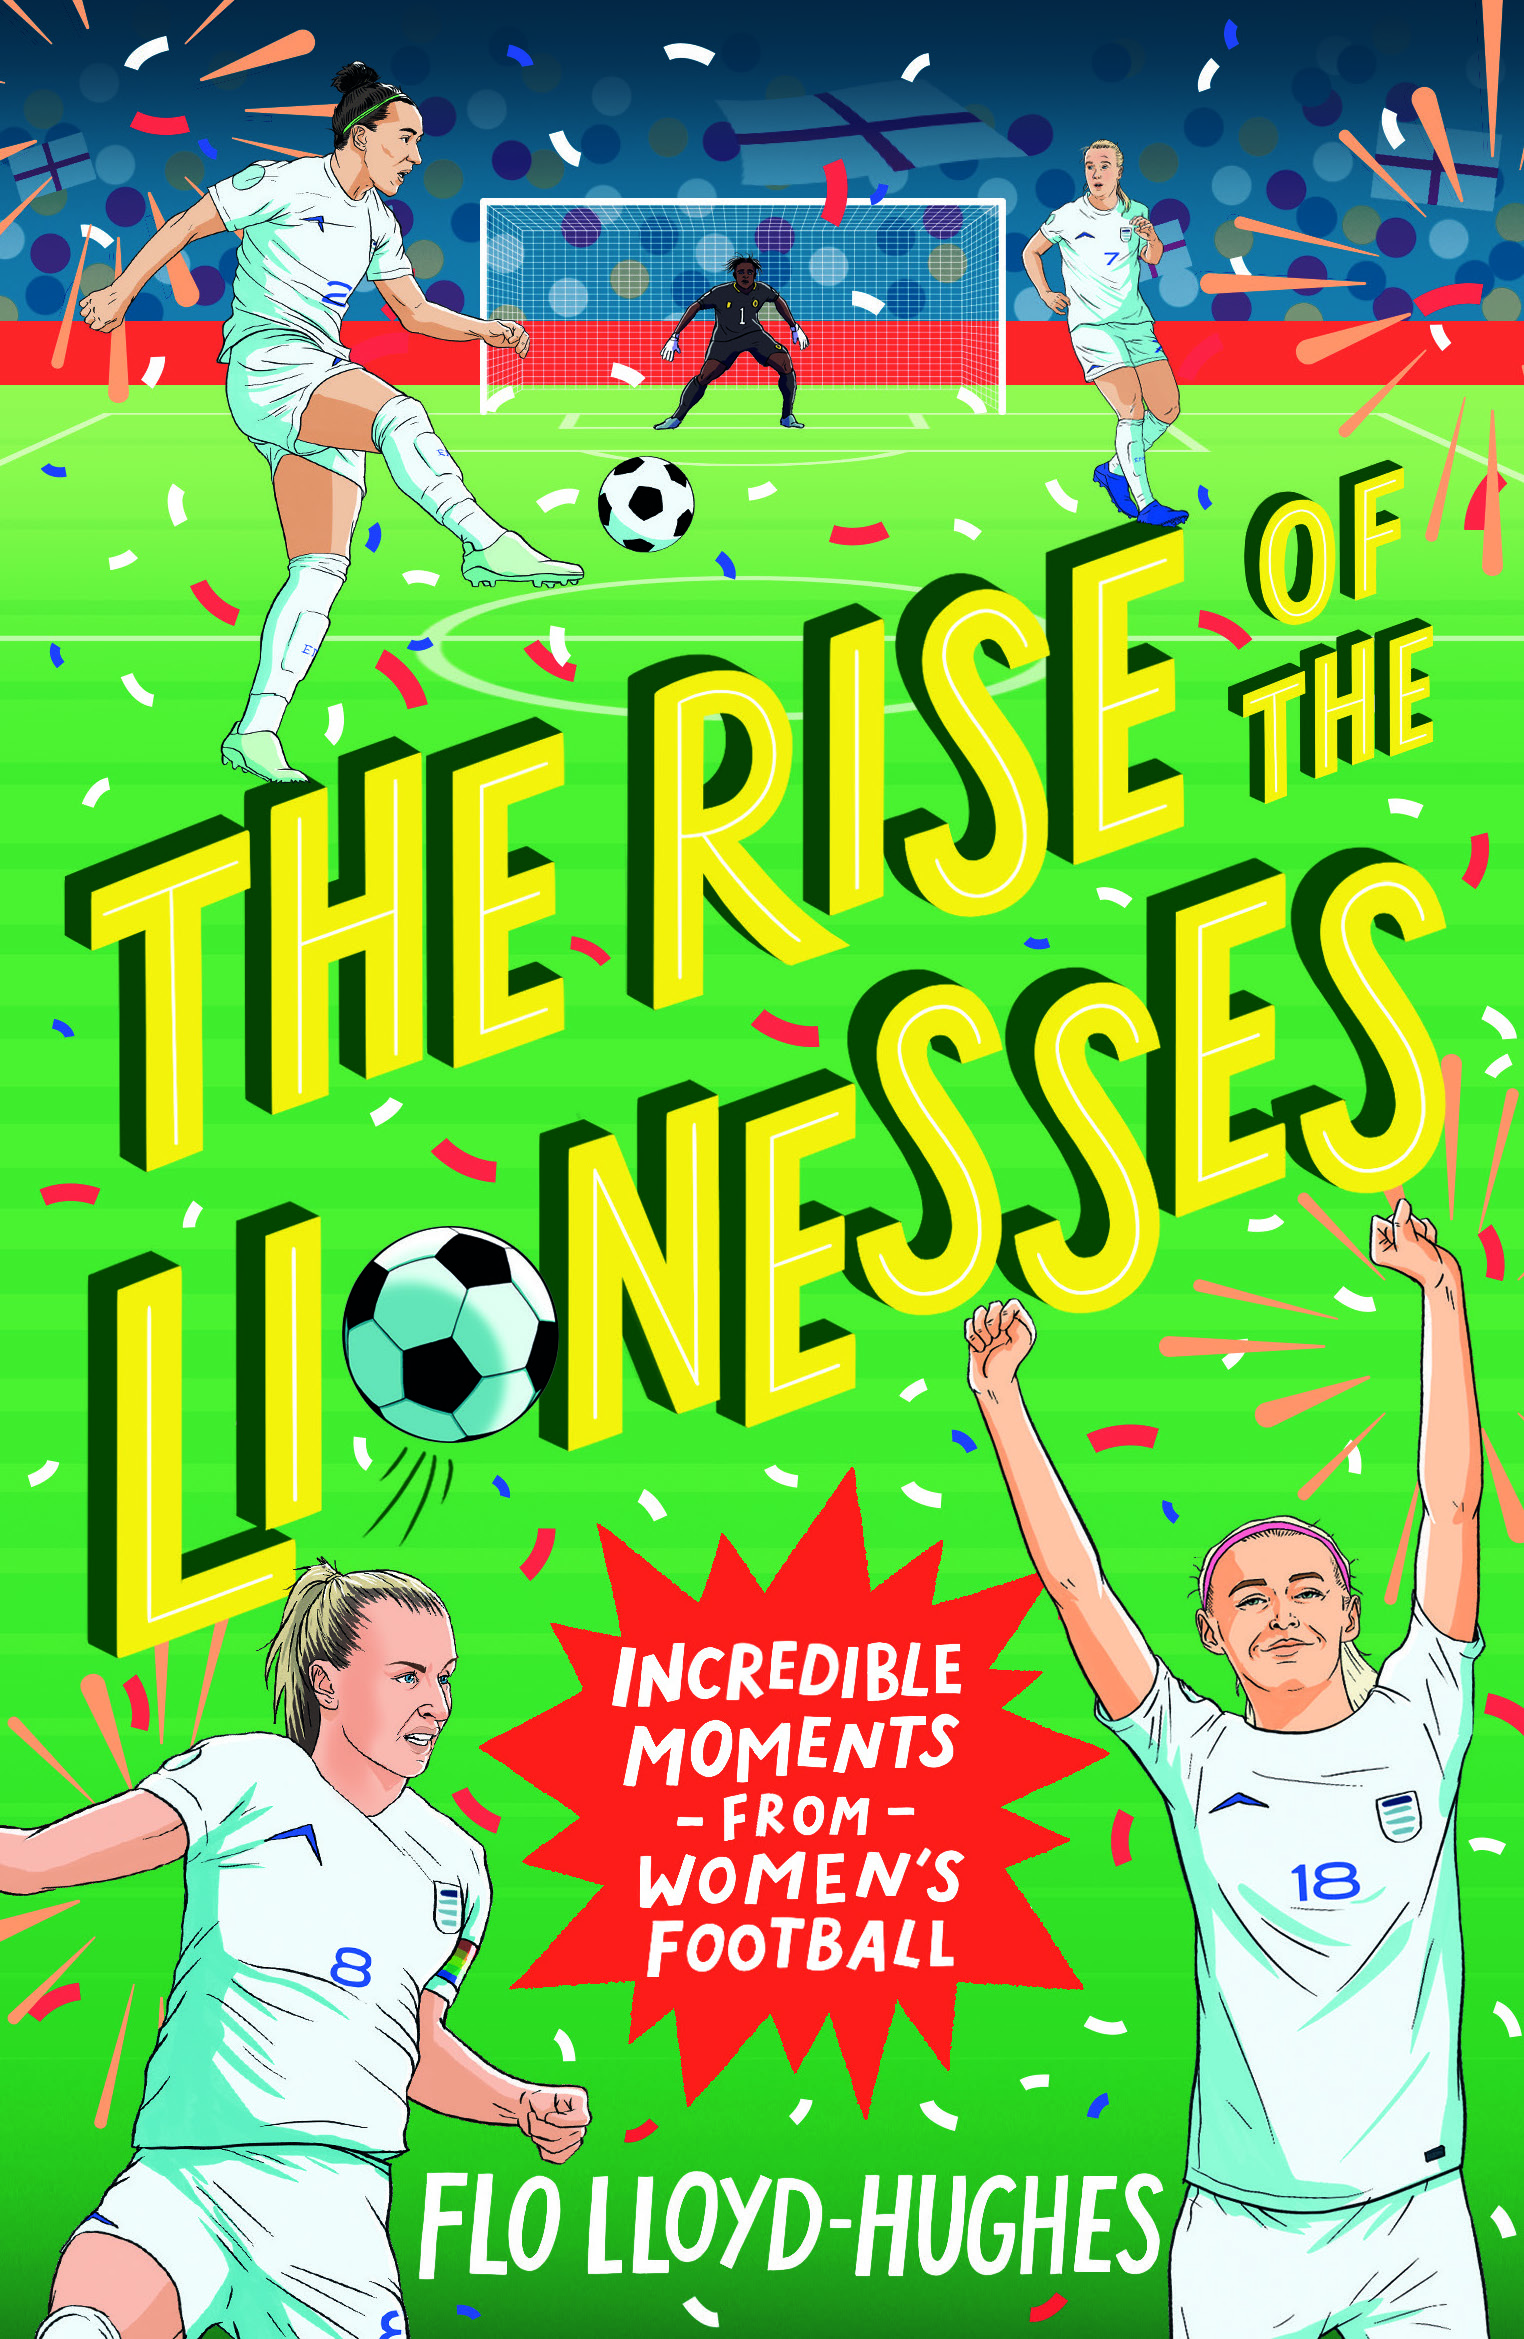 The-Rise-of-the-Lionesses-Incredible-Moments-from-Women-s-Football